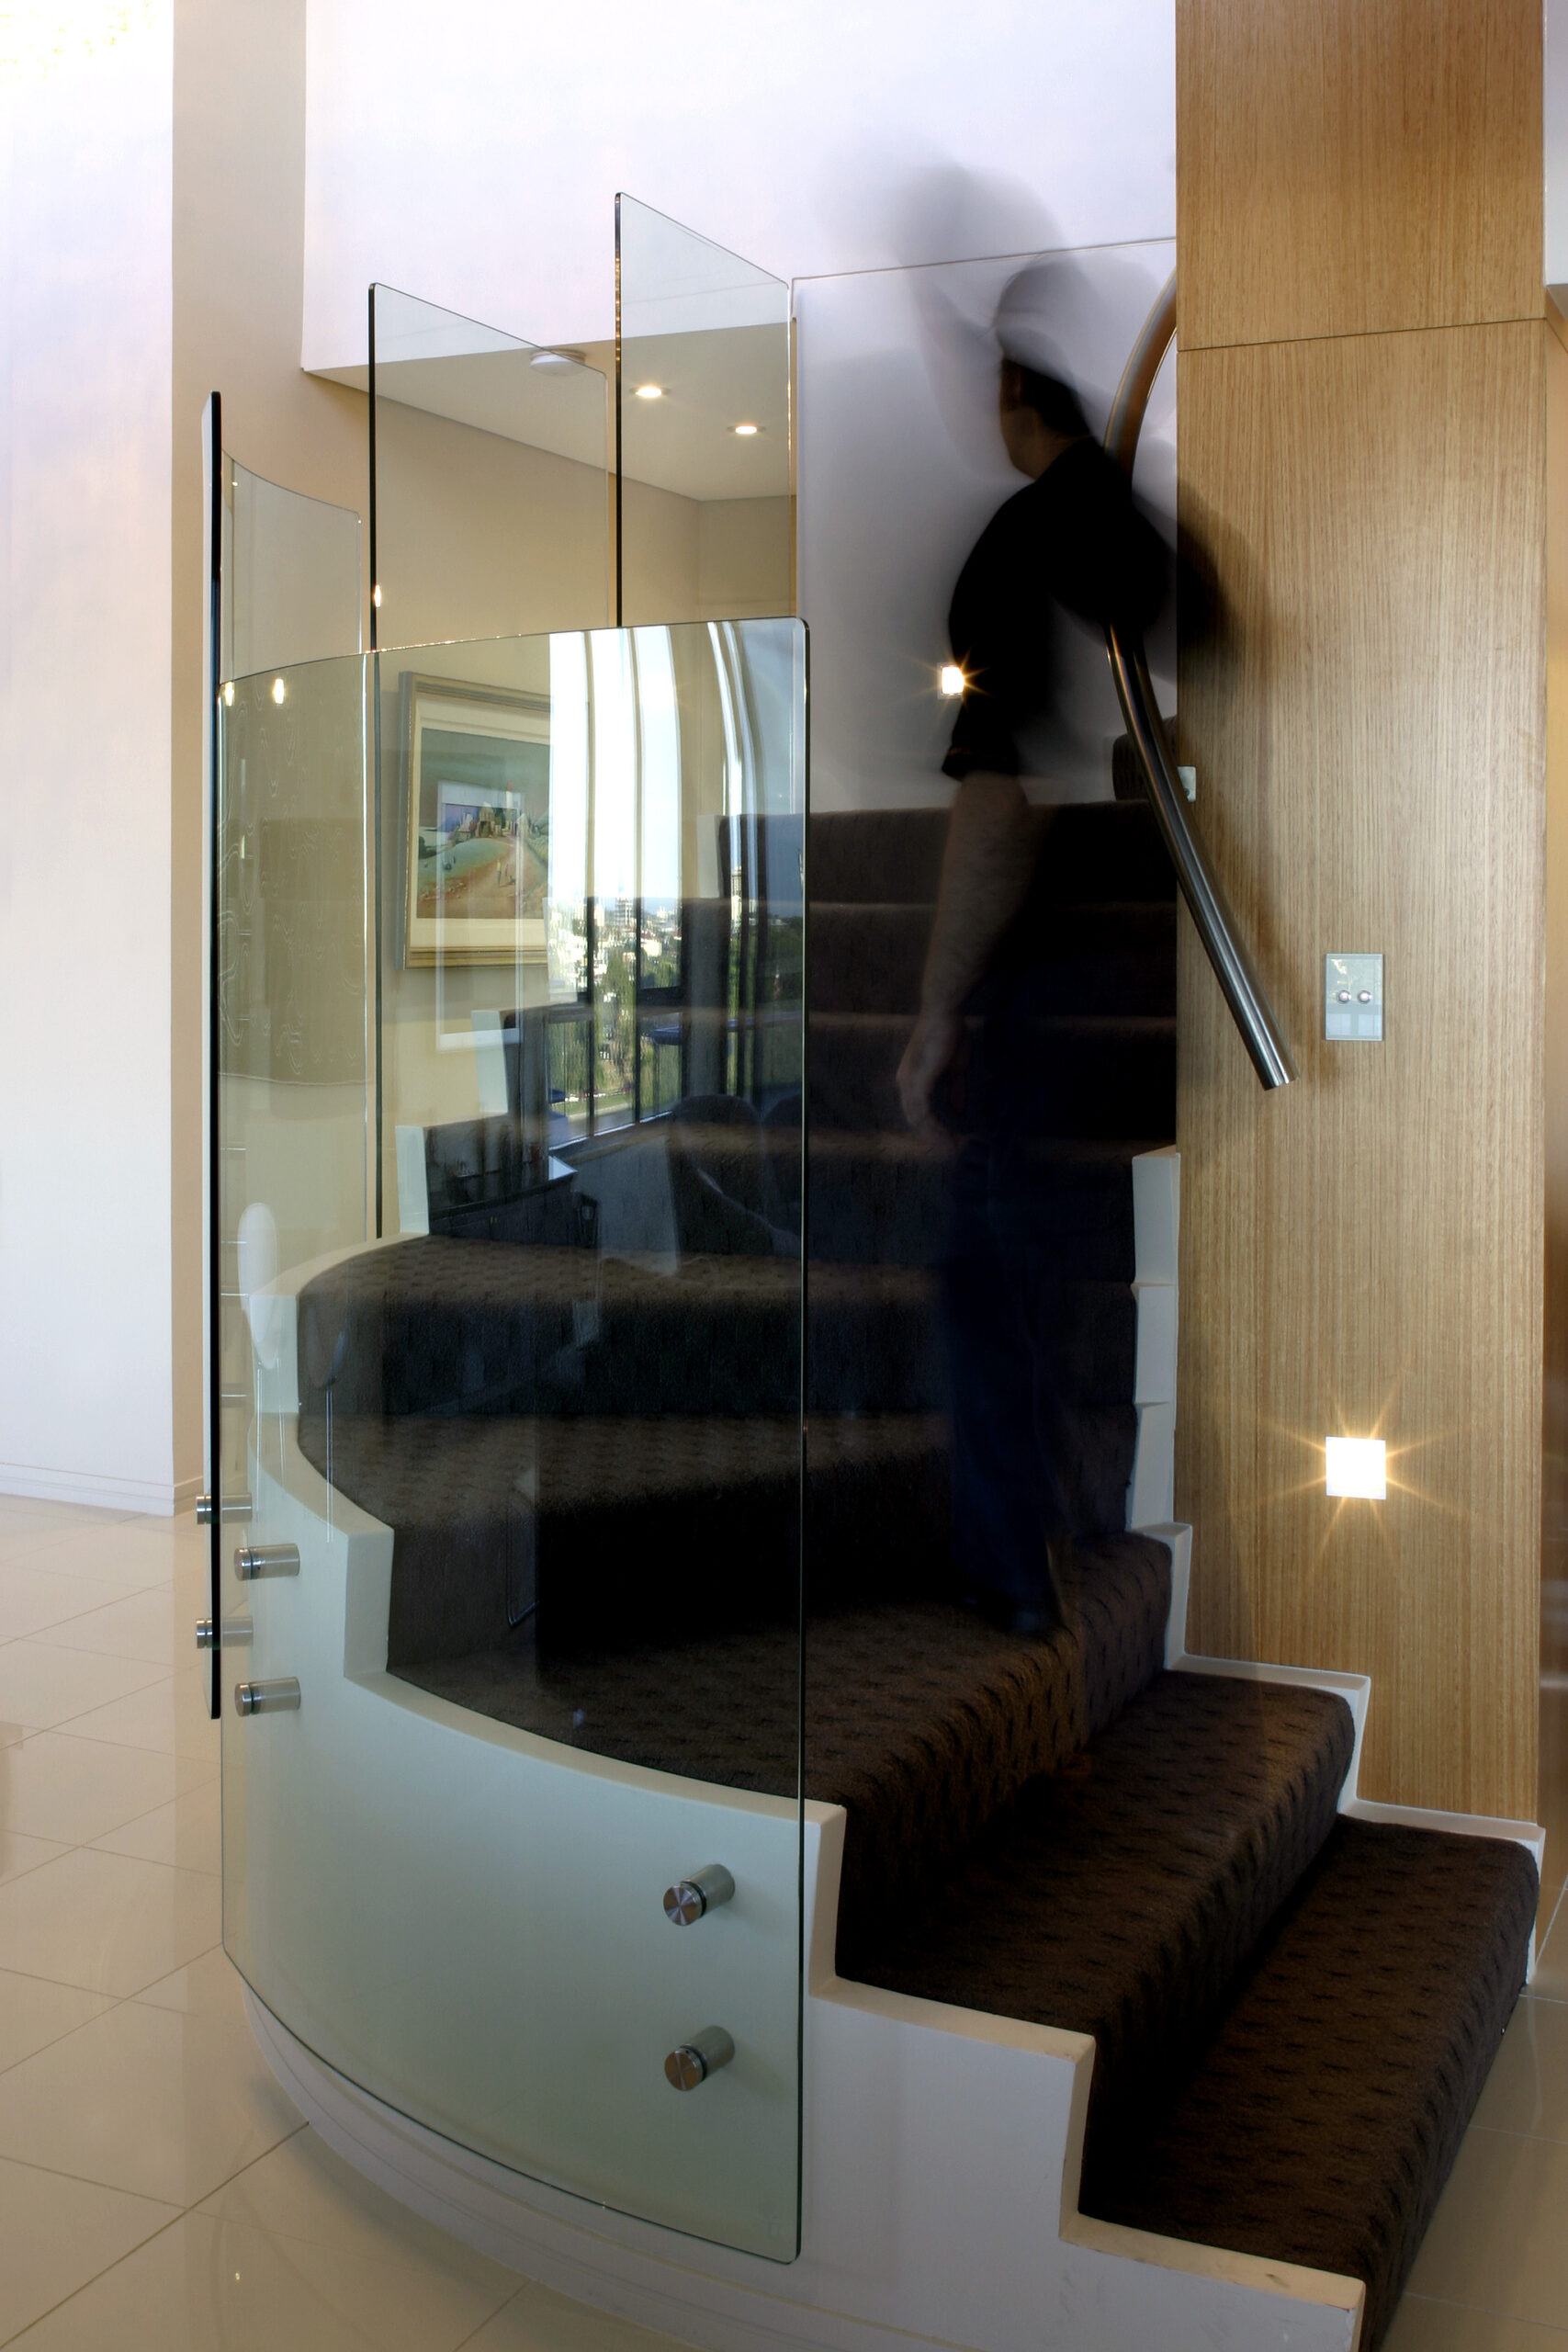 Interior of a penthouse showcasing a spiral staircase with an intricately designed handle running alongside. Adjacent to the stairs, a sparkling crystal chandelier illuminates the space